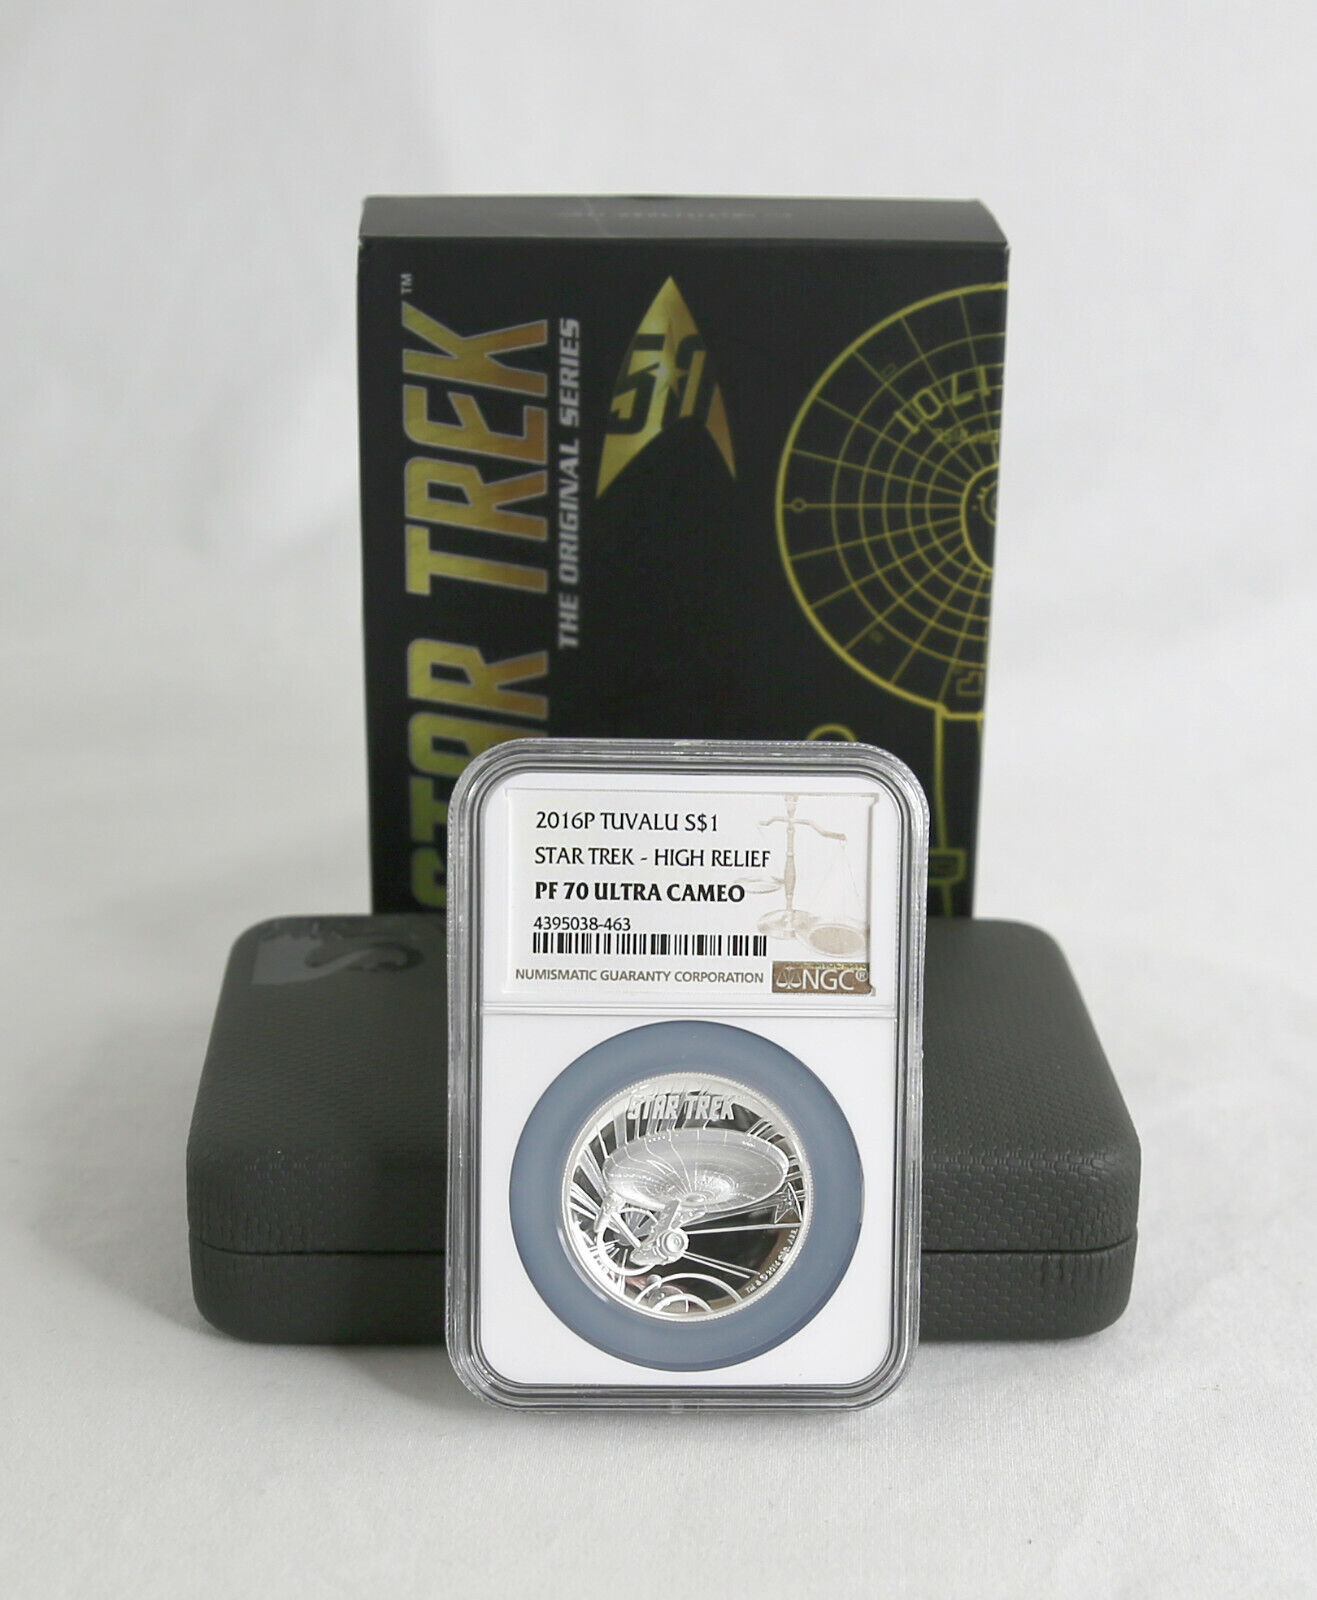 STAR TREK High Relief PF70 ULTRA CAMEO 2016 Tuvalu Silver 999 NGC with Case